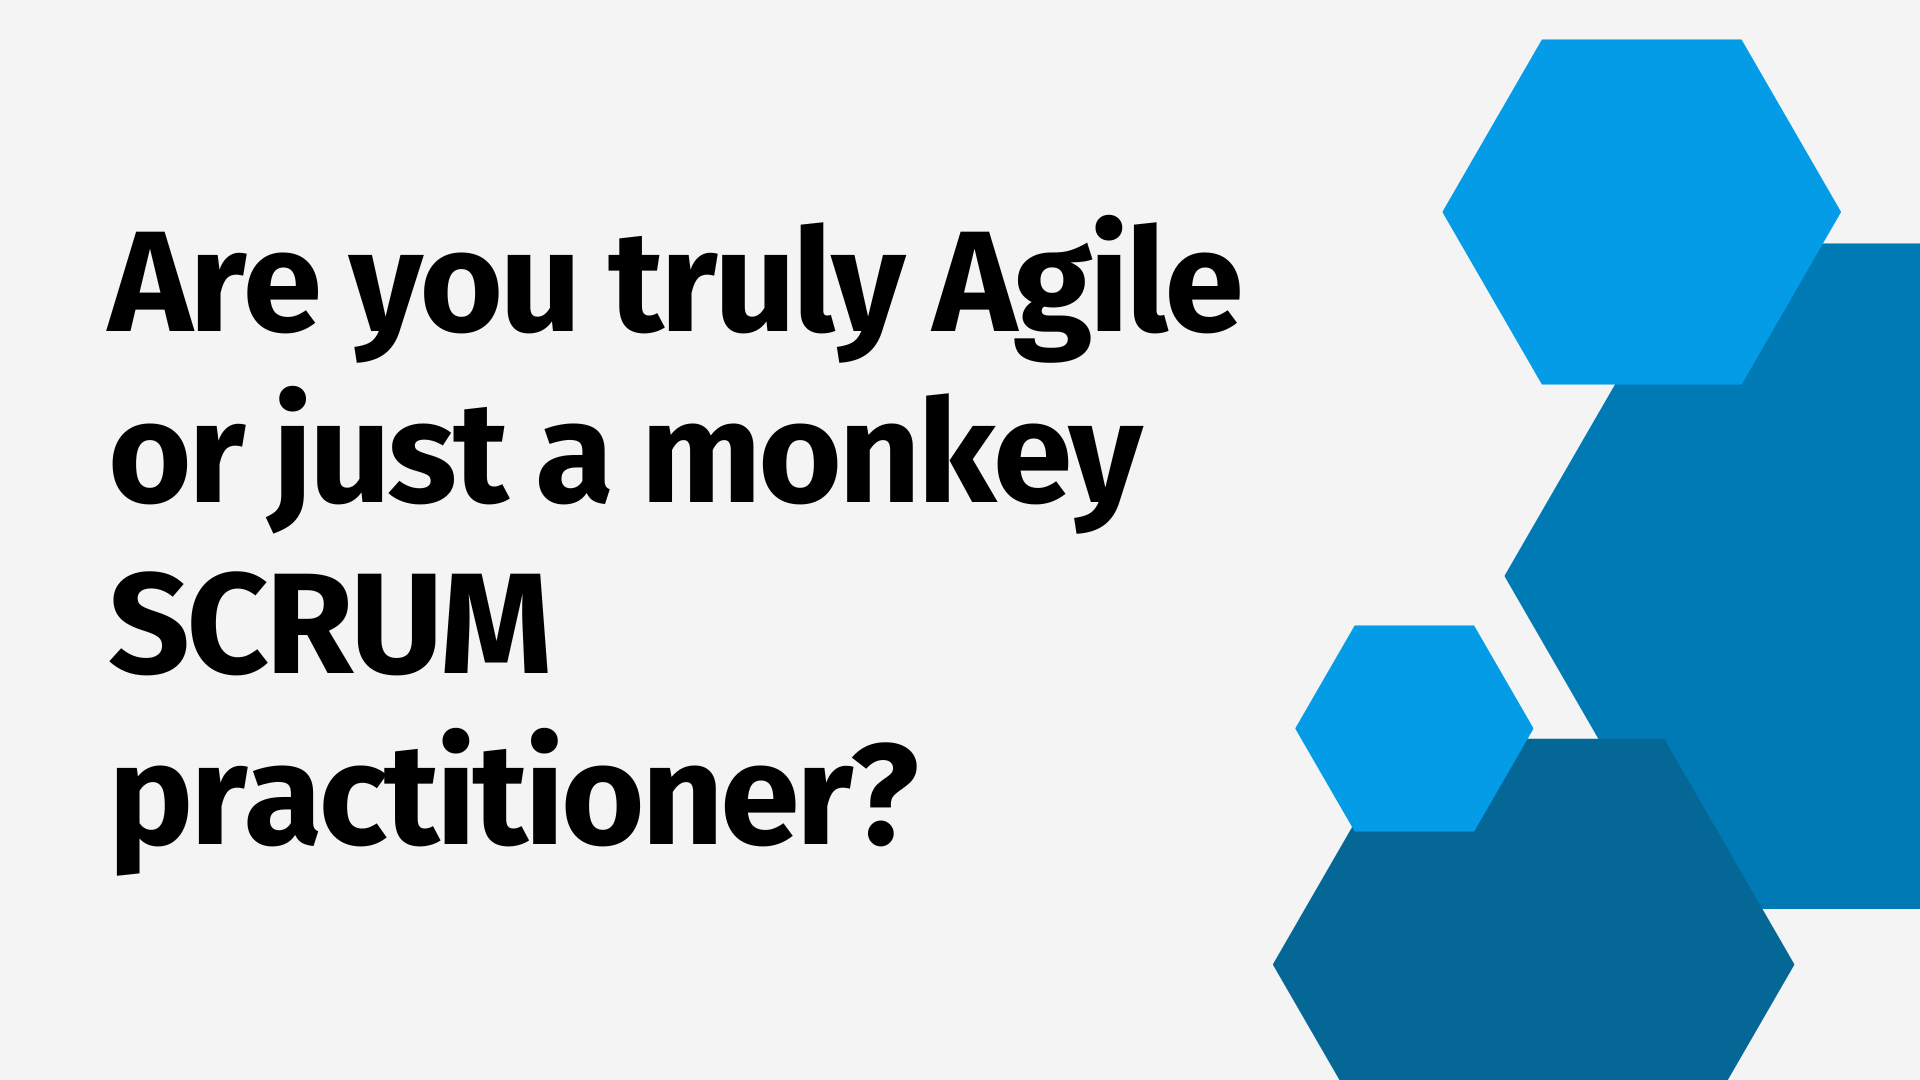 are you truly agile?